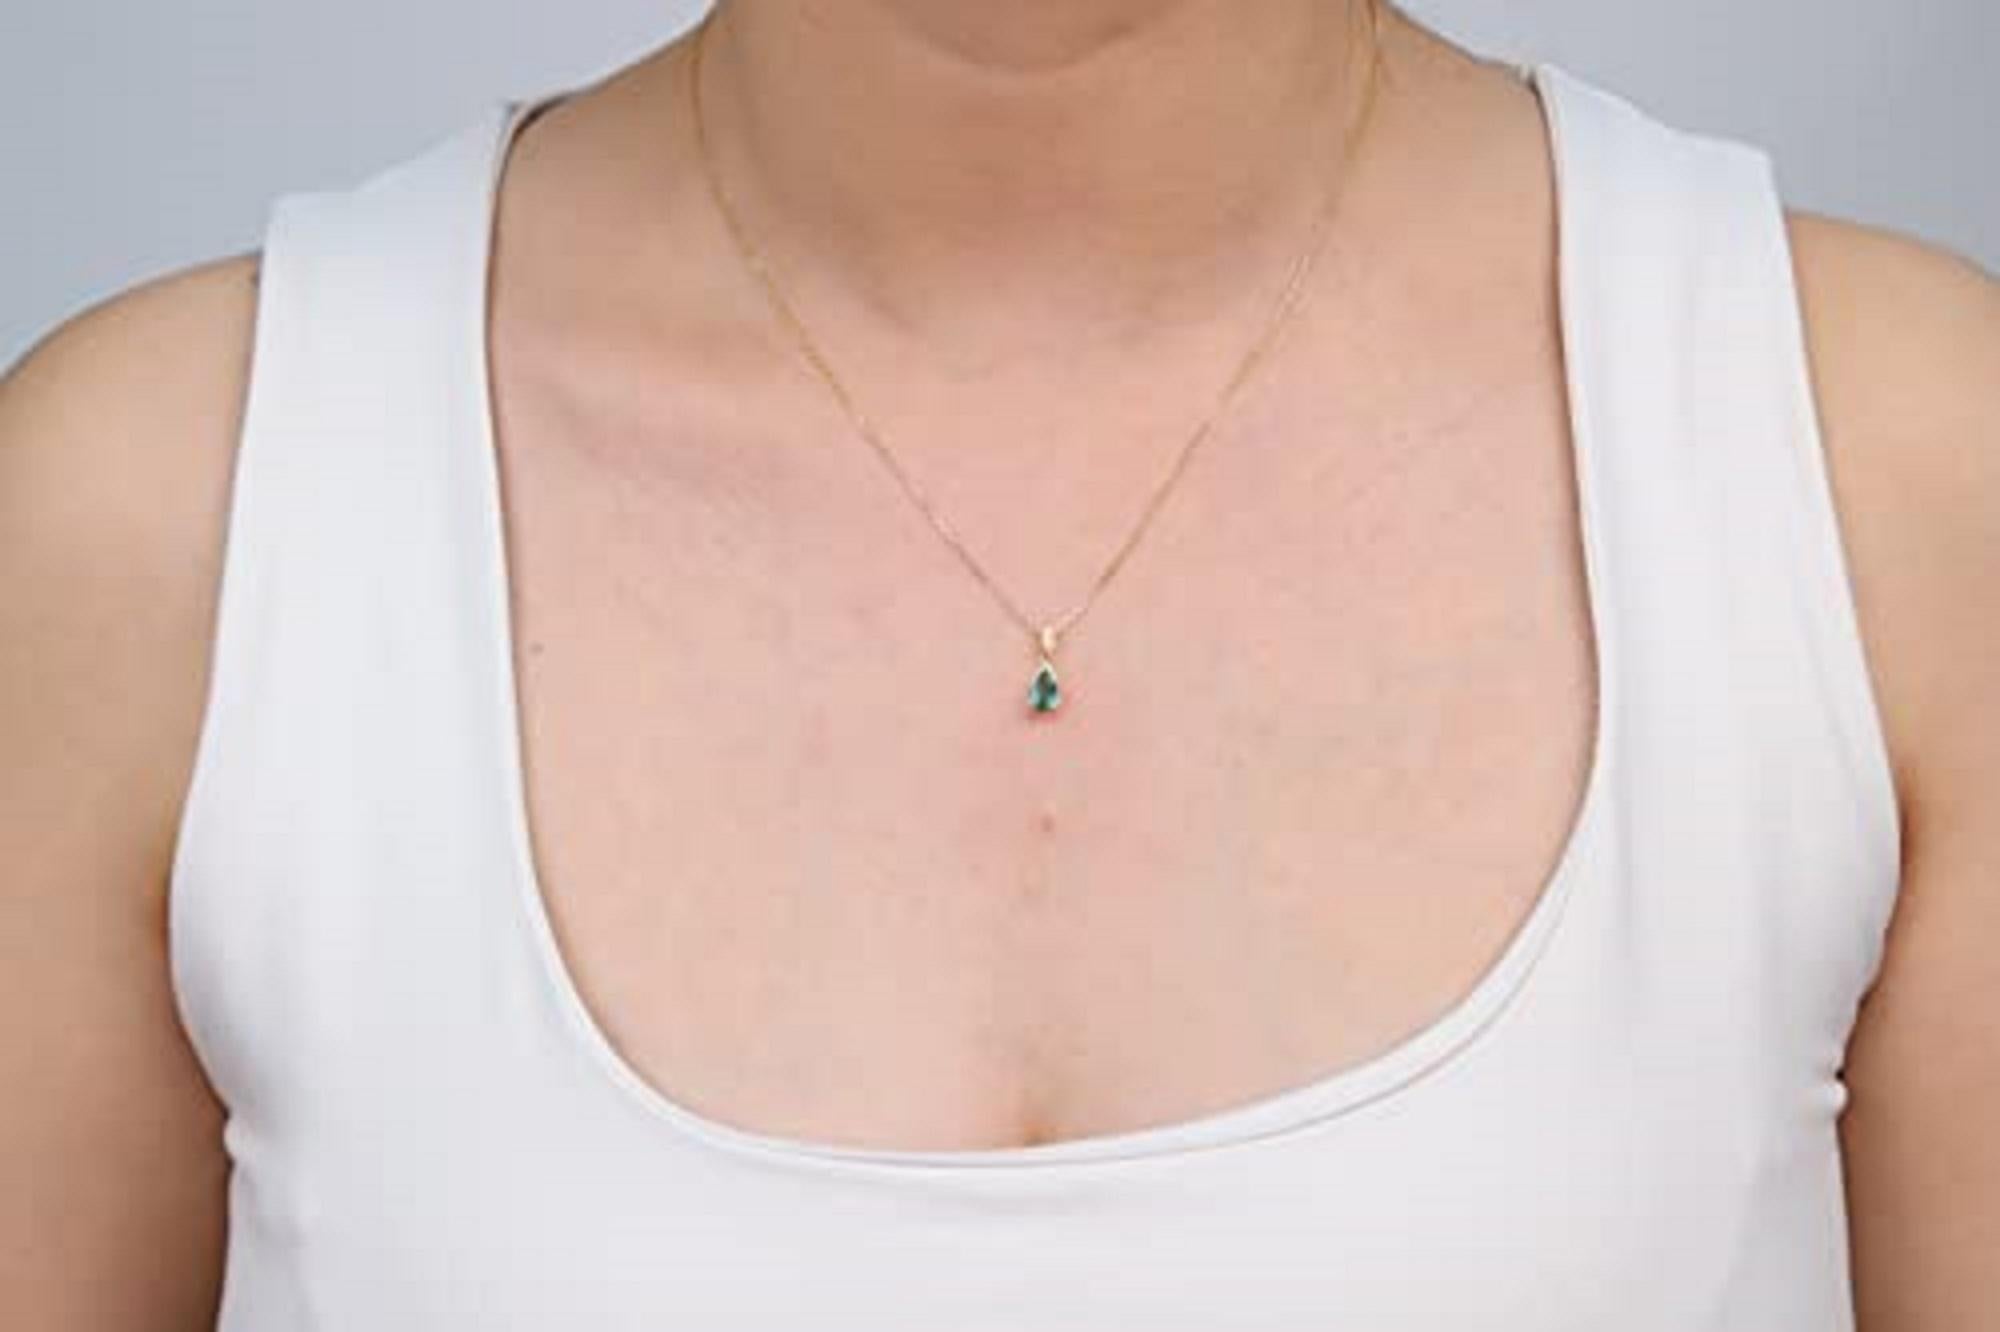 Decorate yourself in elegance with this Pendant is crafted from 10-karat Yellow Gold by Gin & Grace. This Pendant is made up of Pear-Cut Emerald (1 pcs) 0.64 carat and Round-cut White Diamond (10 Pcs) 0.04 Carat. This Pendant is weight 1.81 grams.